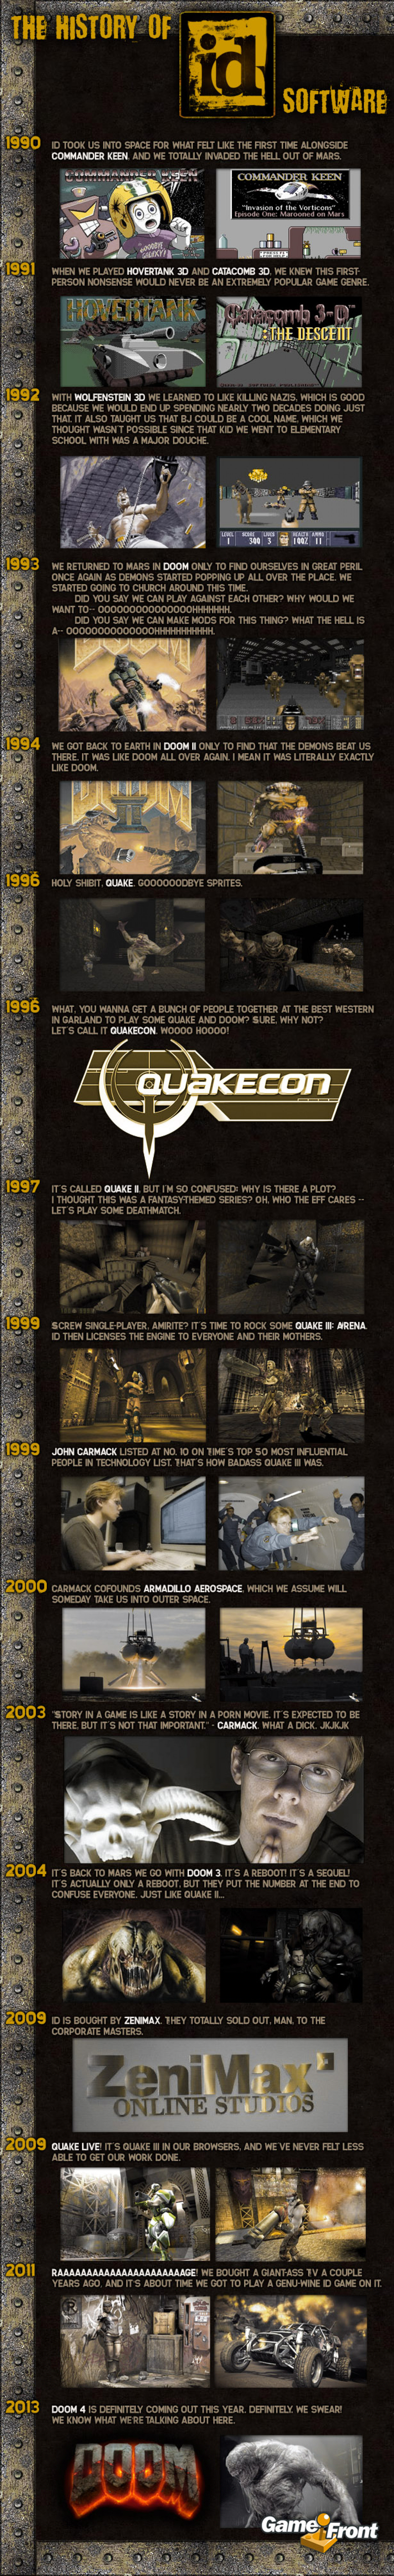 The History of id Software Infographic